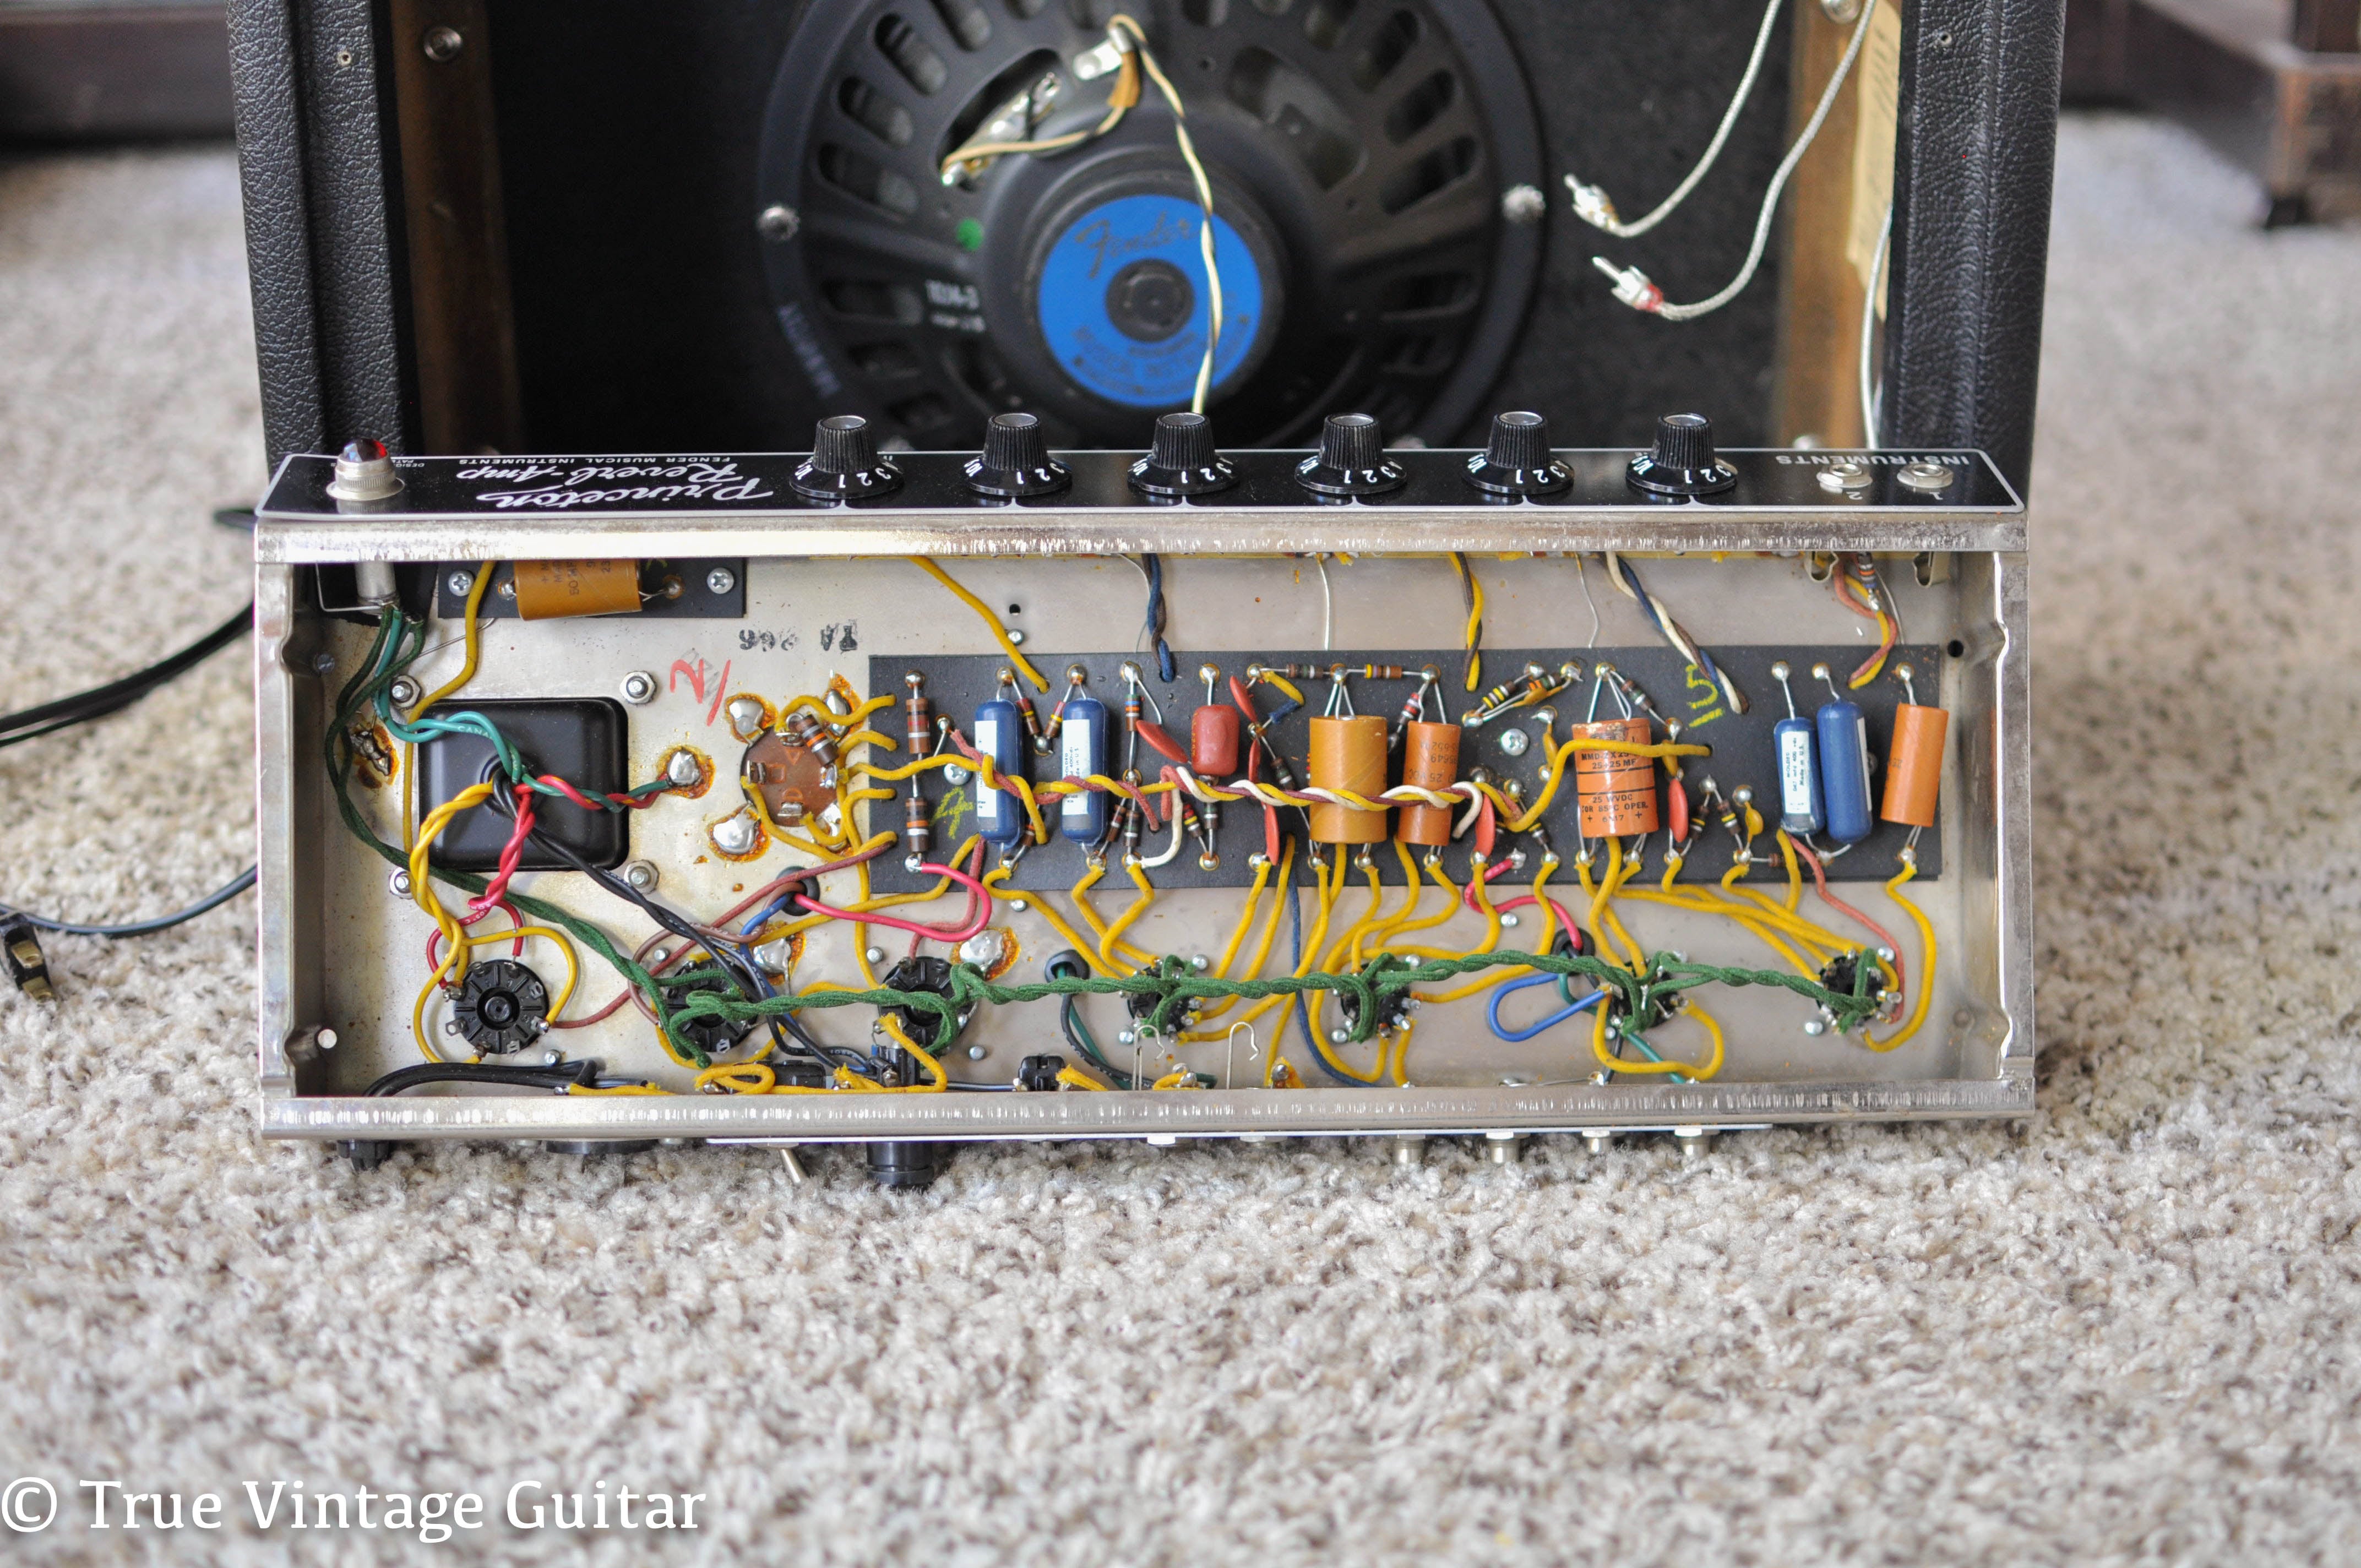 chassis, circuit board, 1965 Fender Princeton Reverb